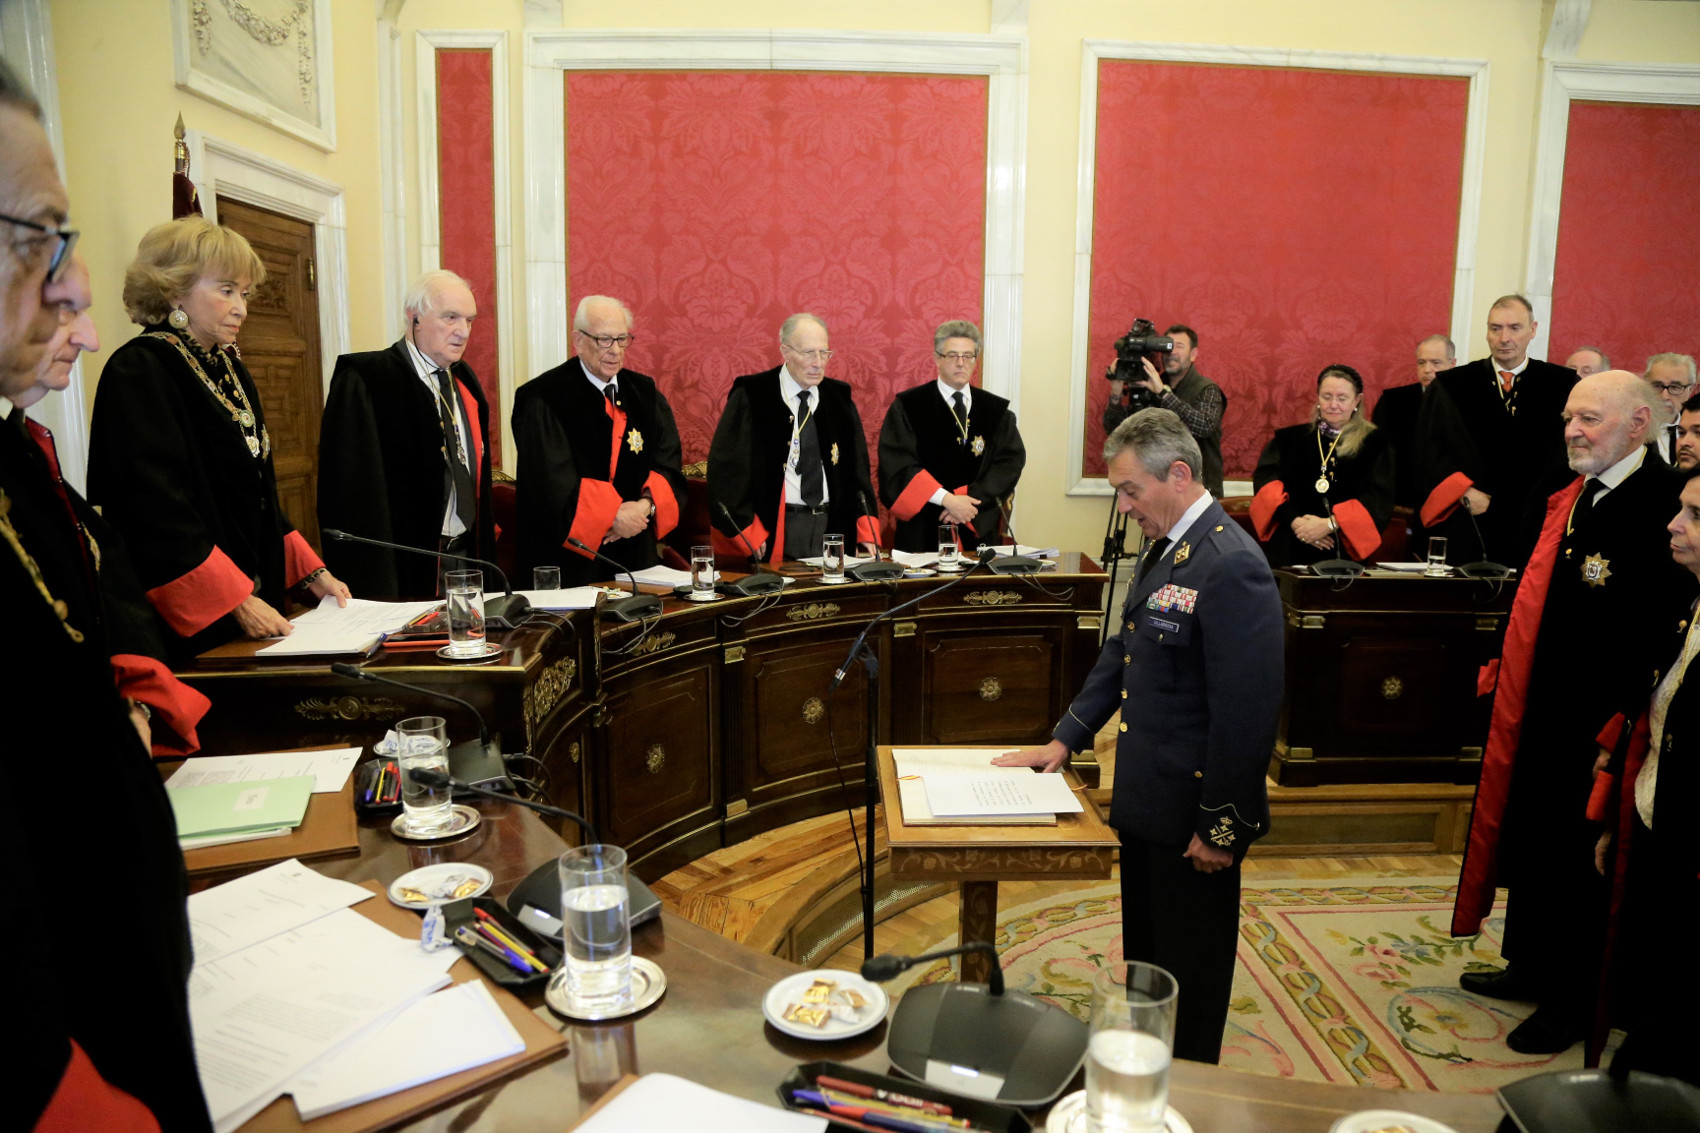 The Chief of The Defence Staff took office as ex officio Member of the Council of State